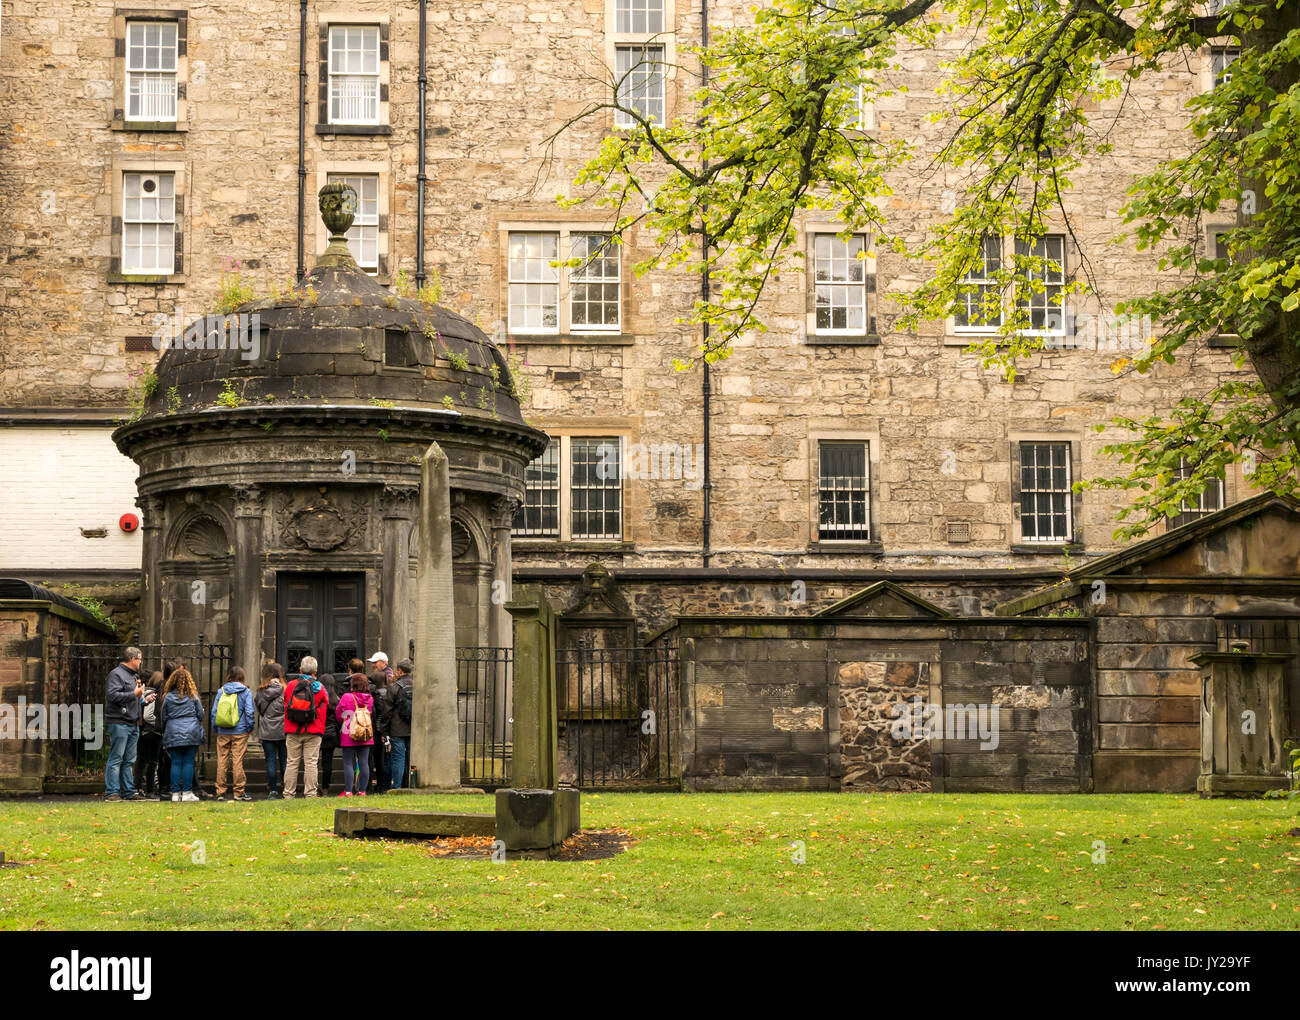 Group of tourists with guide visiting historical Greyfriar's churchyard, Candlemaker Row, Edinburgh, Scotland, UK, admiring the old tombs Stock Photo